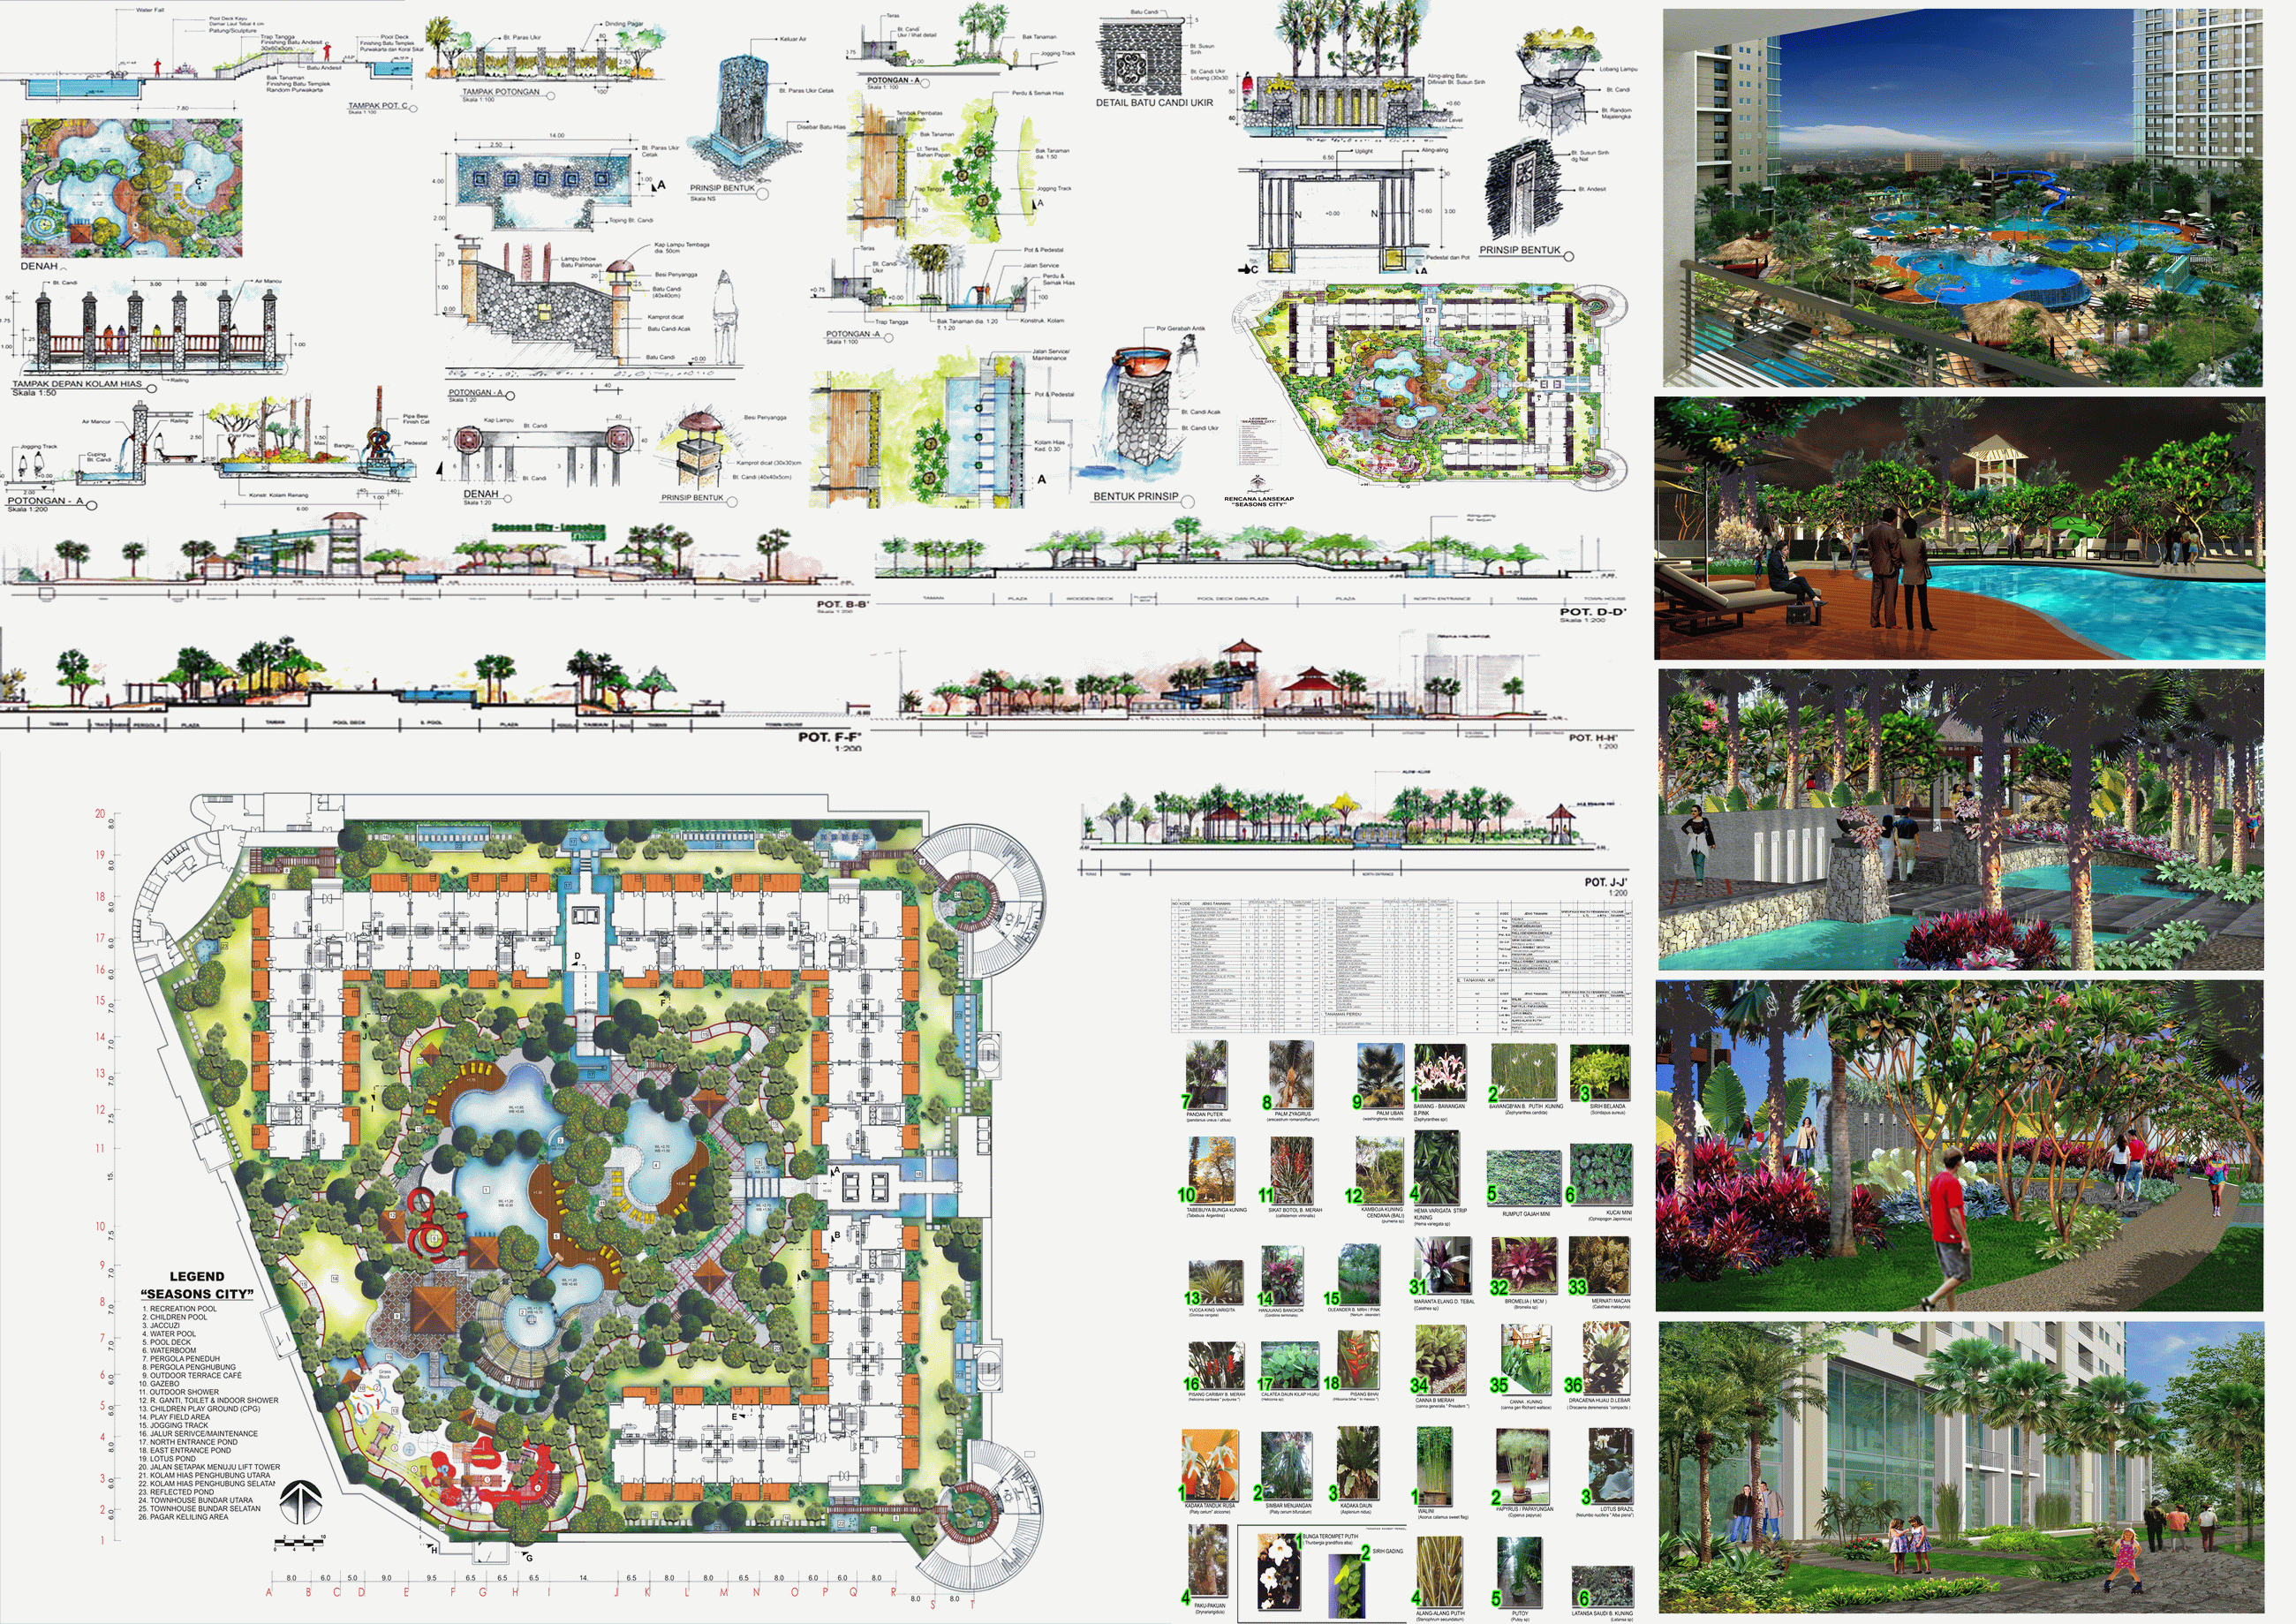 Land8_Plant_Contest_2010(7th SKY FLYING WATER PARK LANDSCAPE)